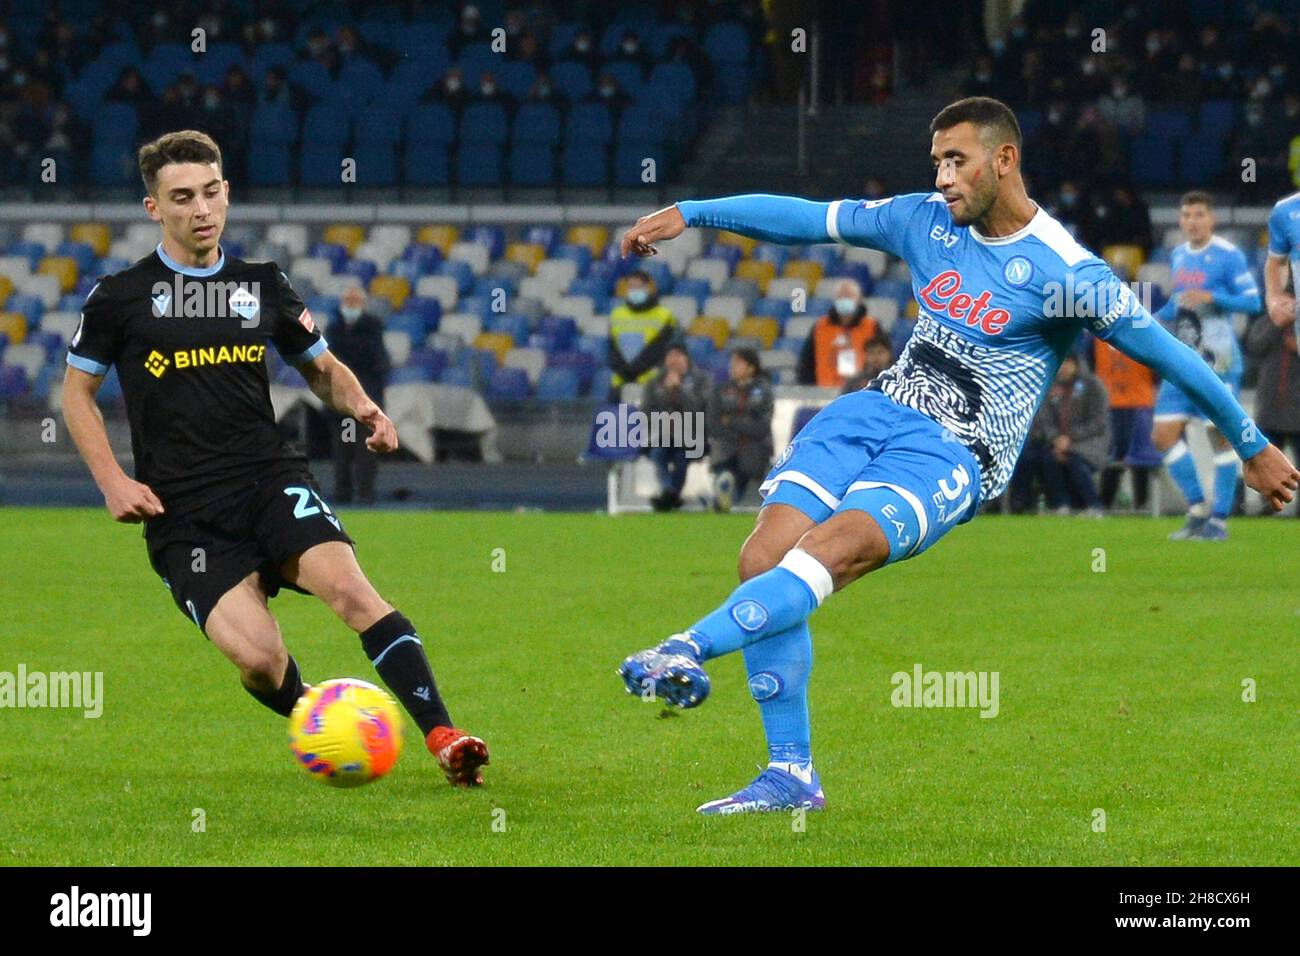 NAPELS, ITALY - NOVEMBER 28: Elseid Hysaj of SS Lazio battles for the ball with Faouzi Ghoulam of SSC Napoli during the Serie A TIM match between SSC Napoli and Lazio Roma at Stadio Diego Armando Maradona on November 28, 2021 in Napels, Italy (Photo by Ciro Santangelo/Orange Pictures) Stock Photo